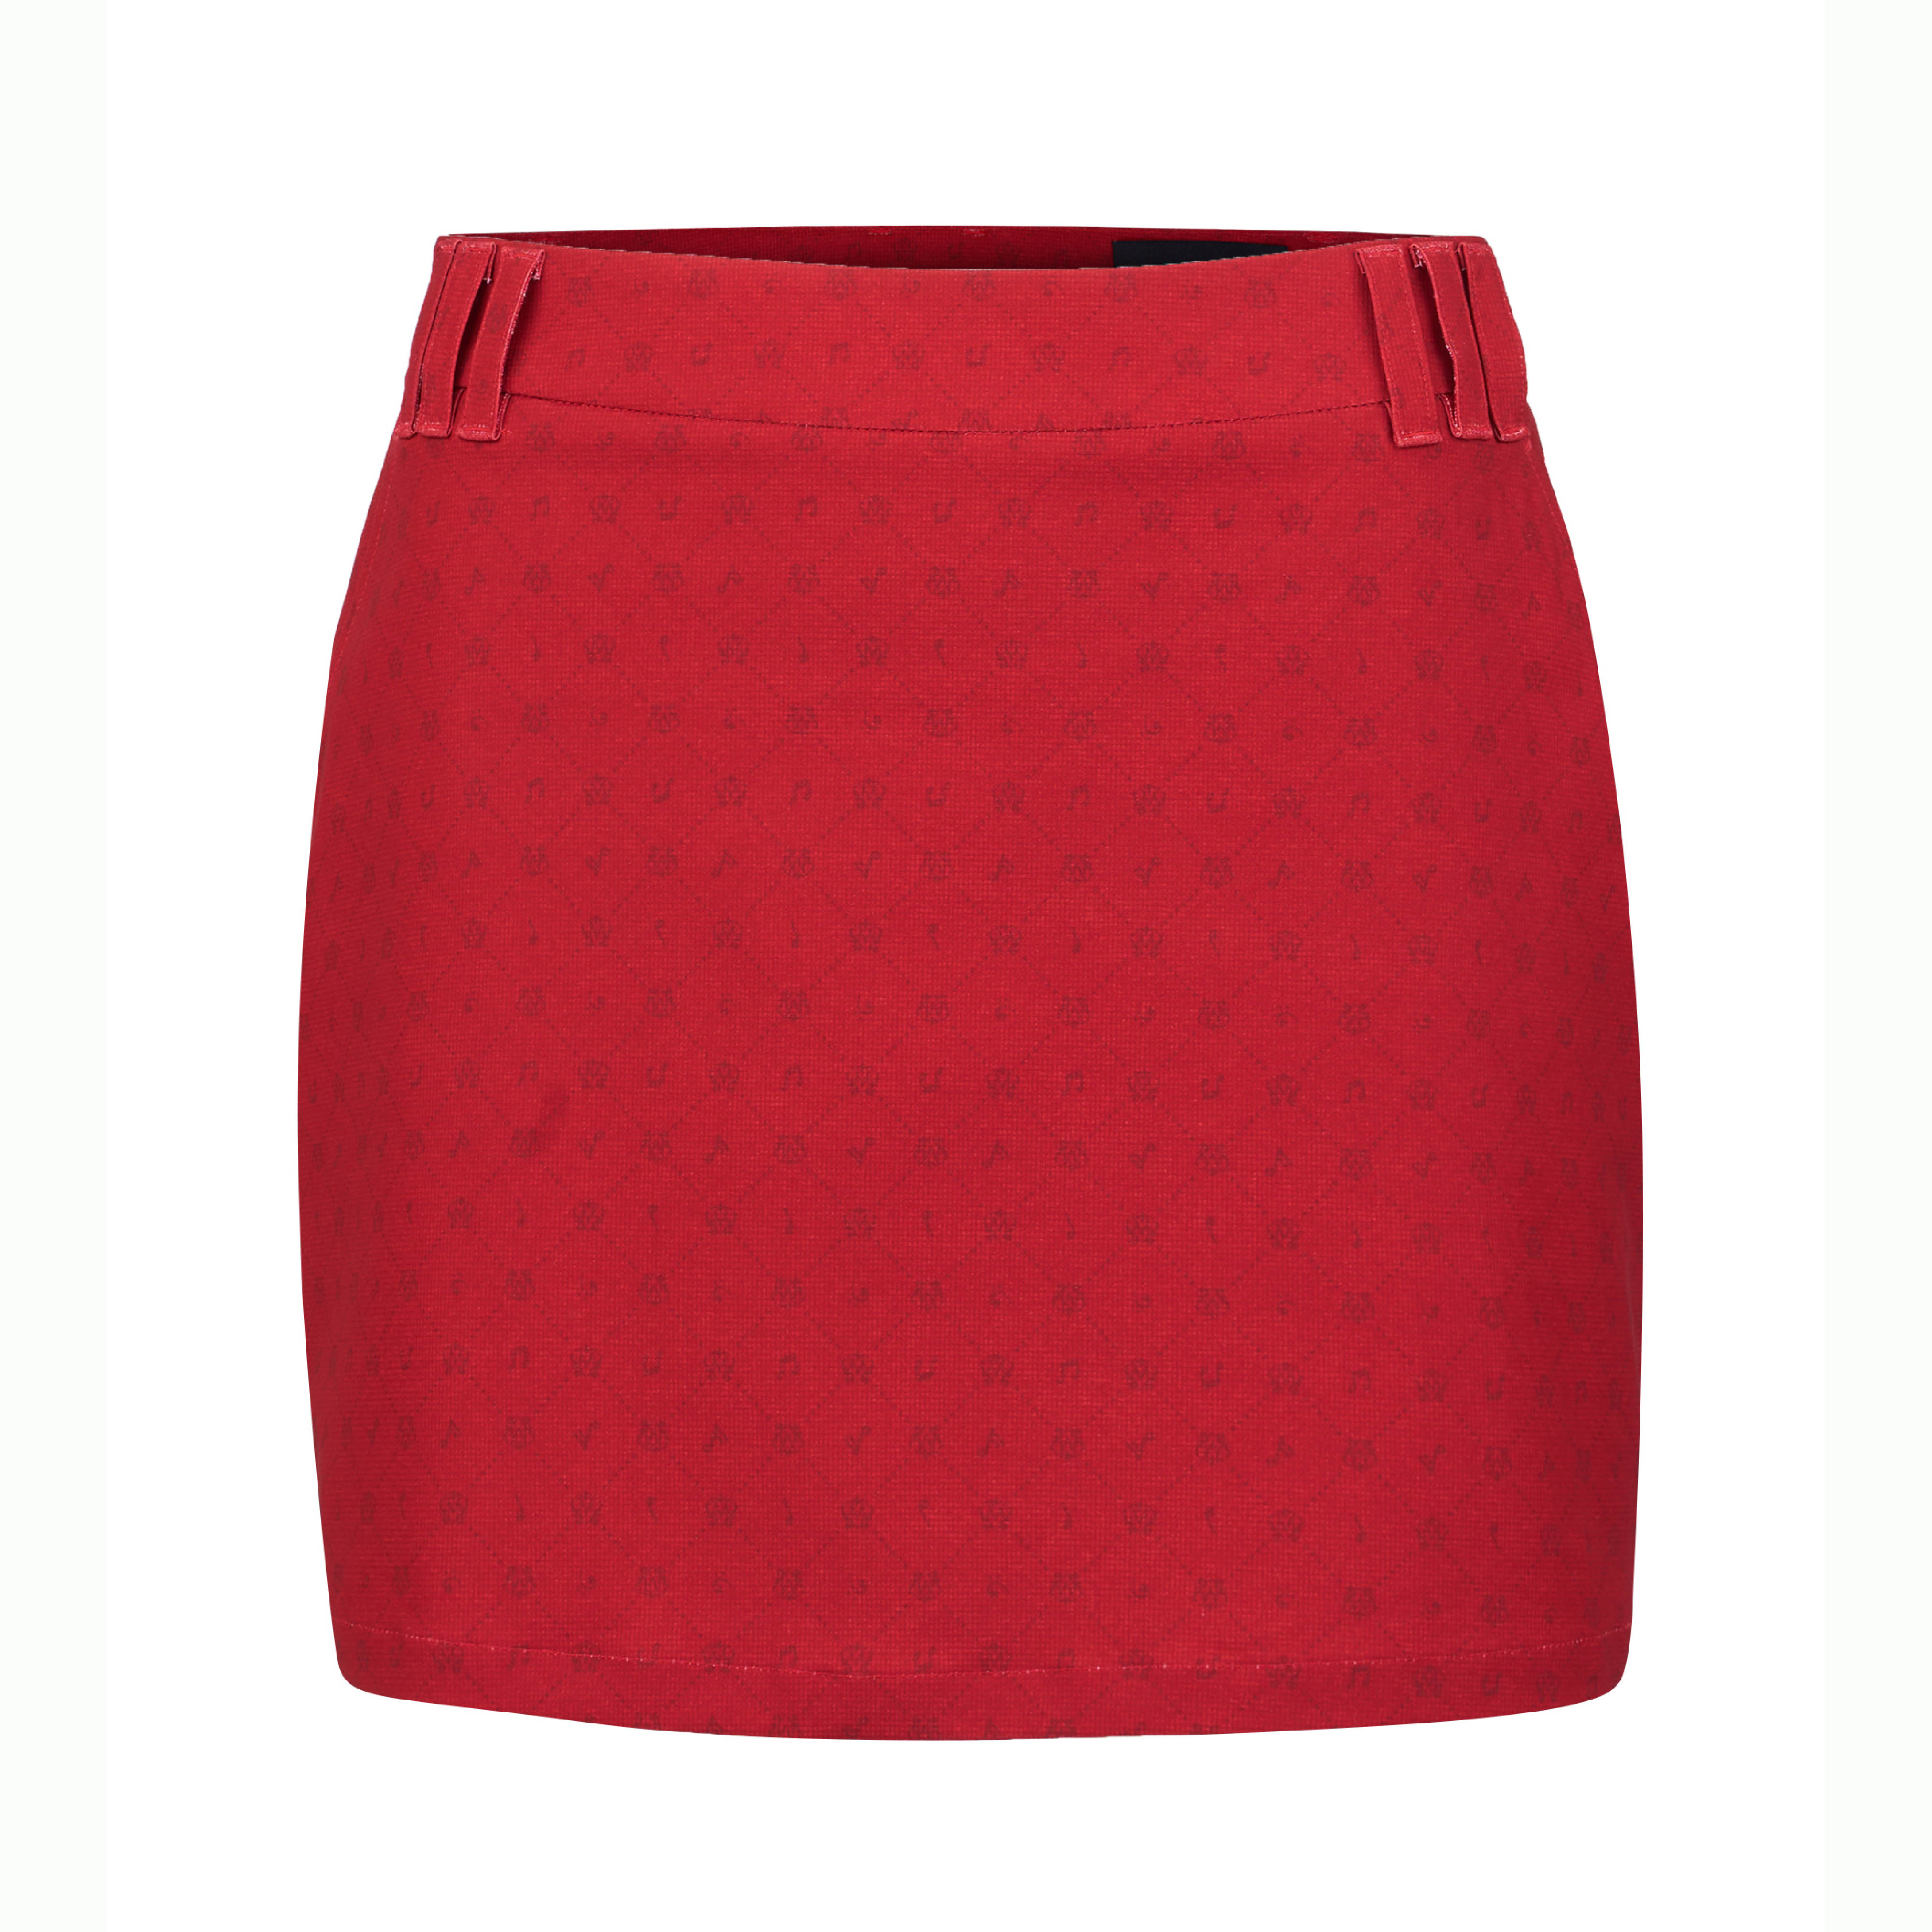 Layla Skirt - Red